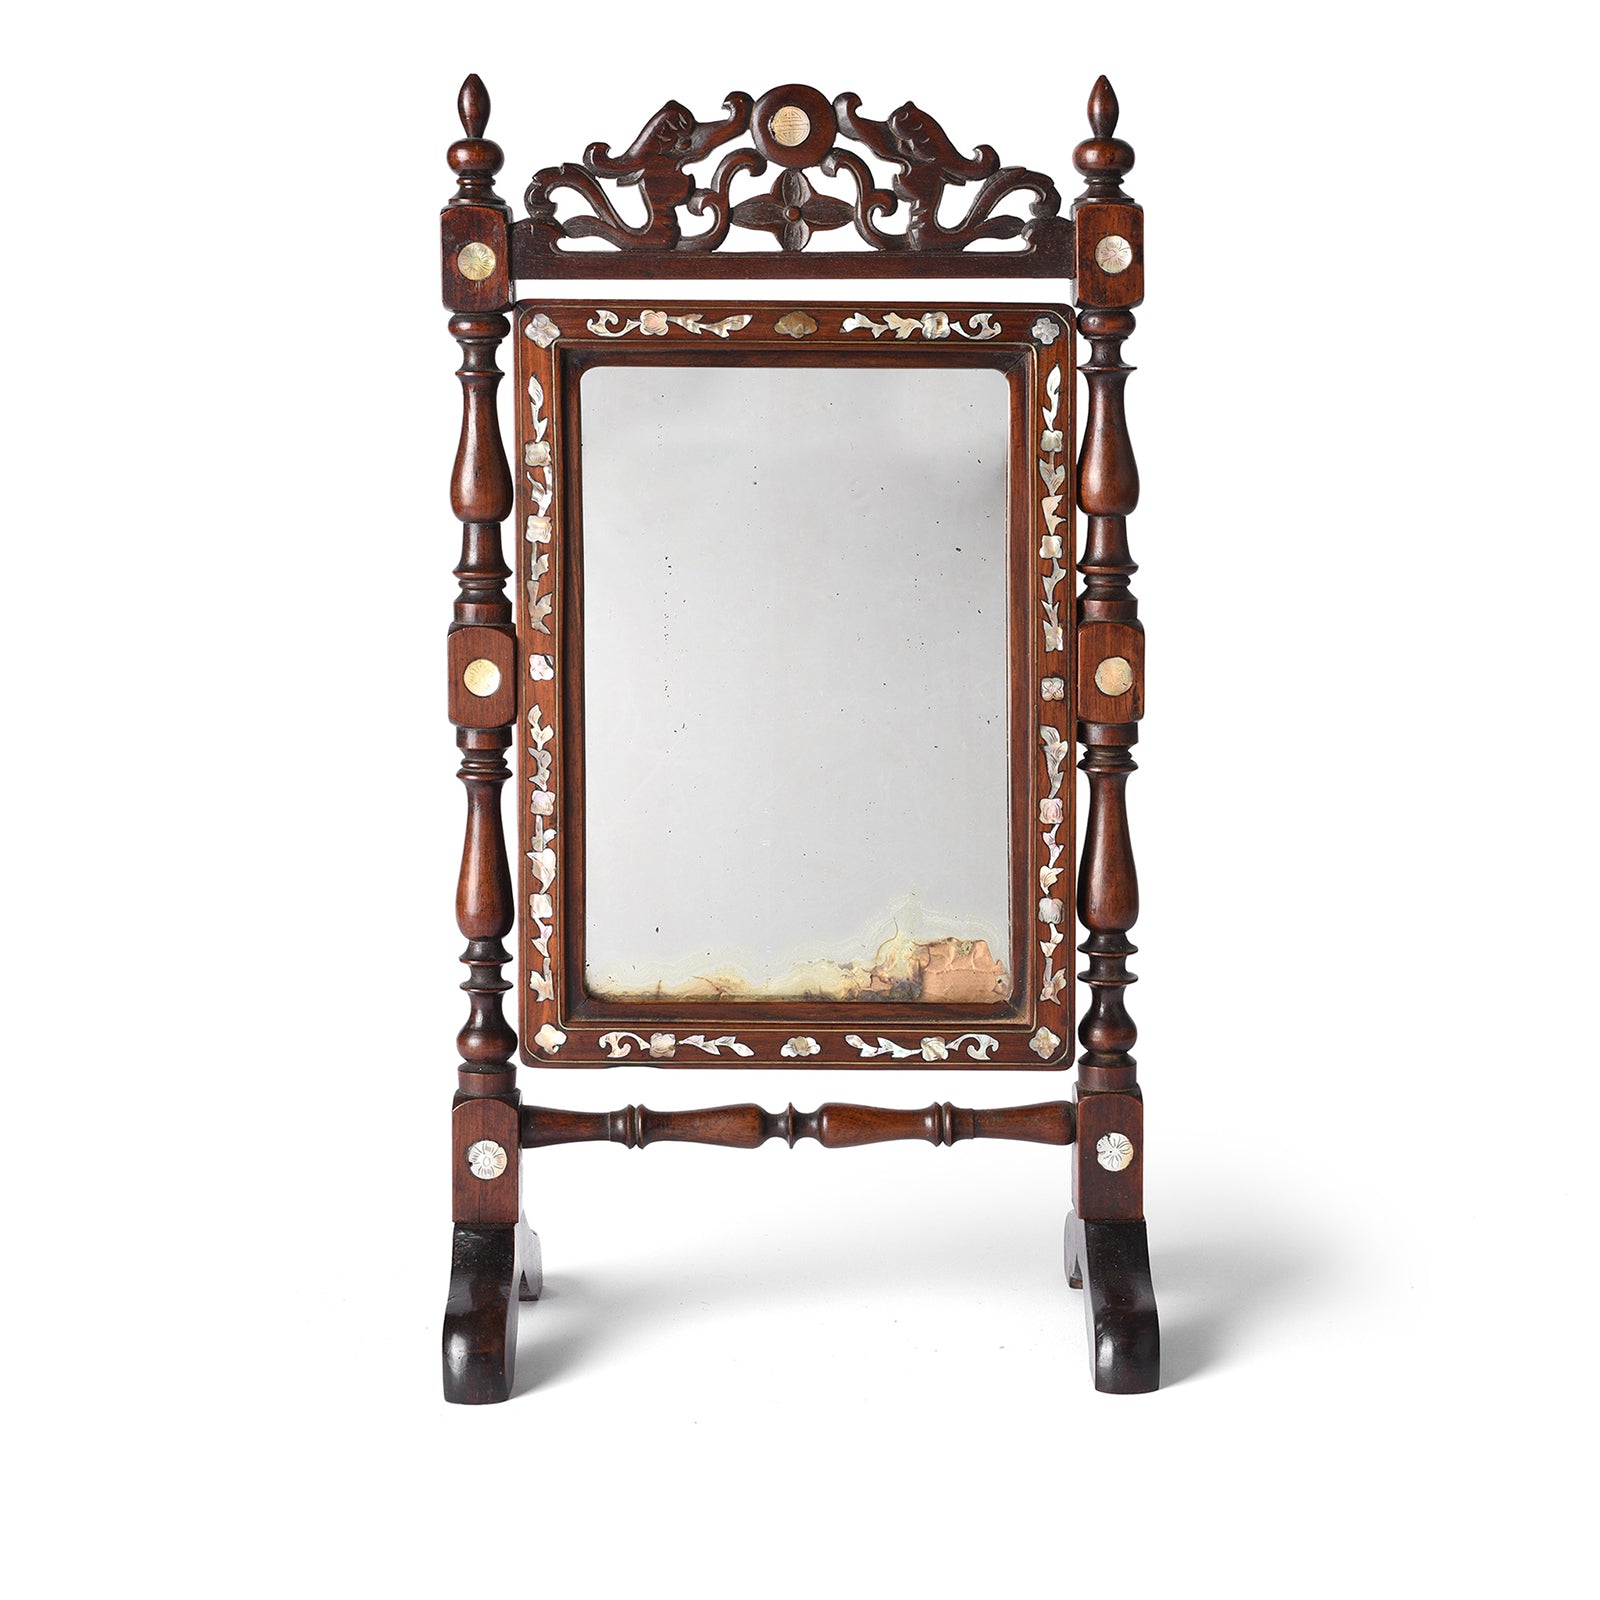 Antique Chinese Mother of Pearl Inlaid Hardwood Vanity Mirror - Late 19th Century | Indigo Antiques